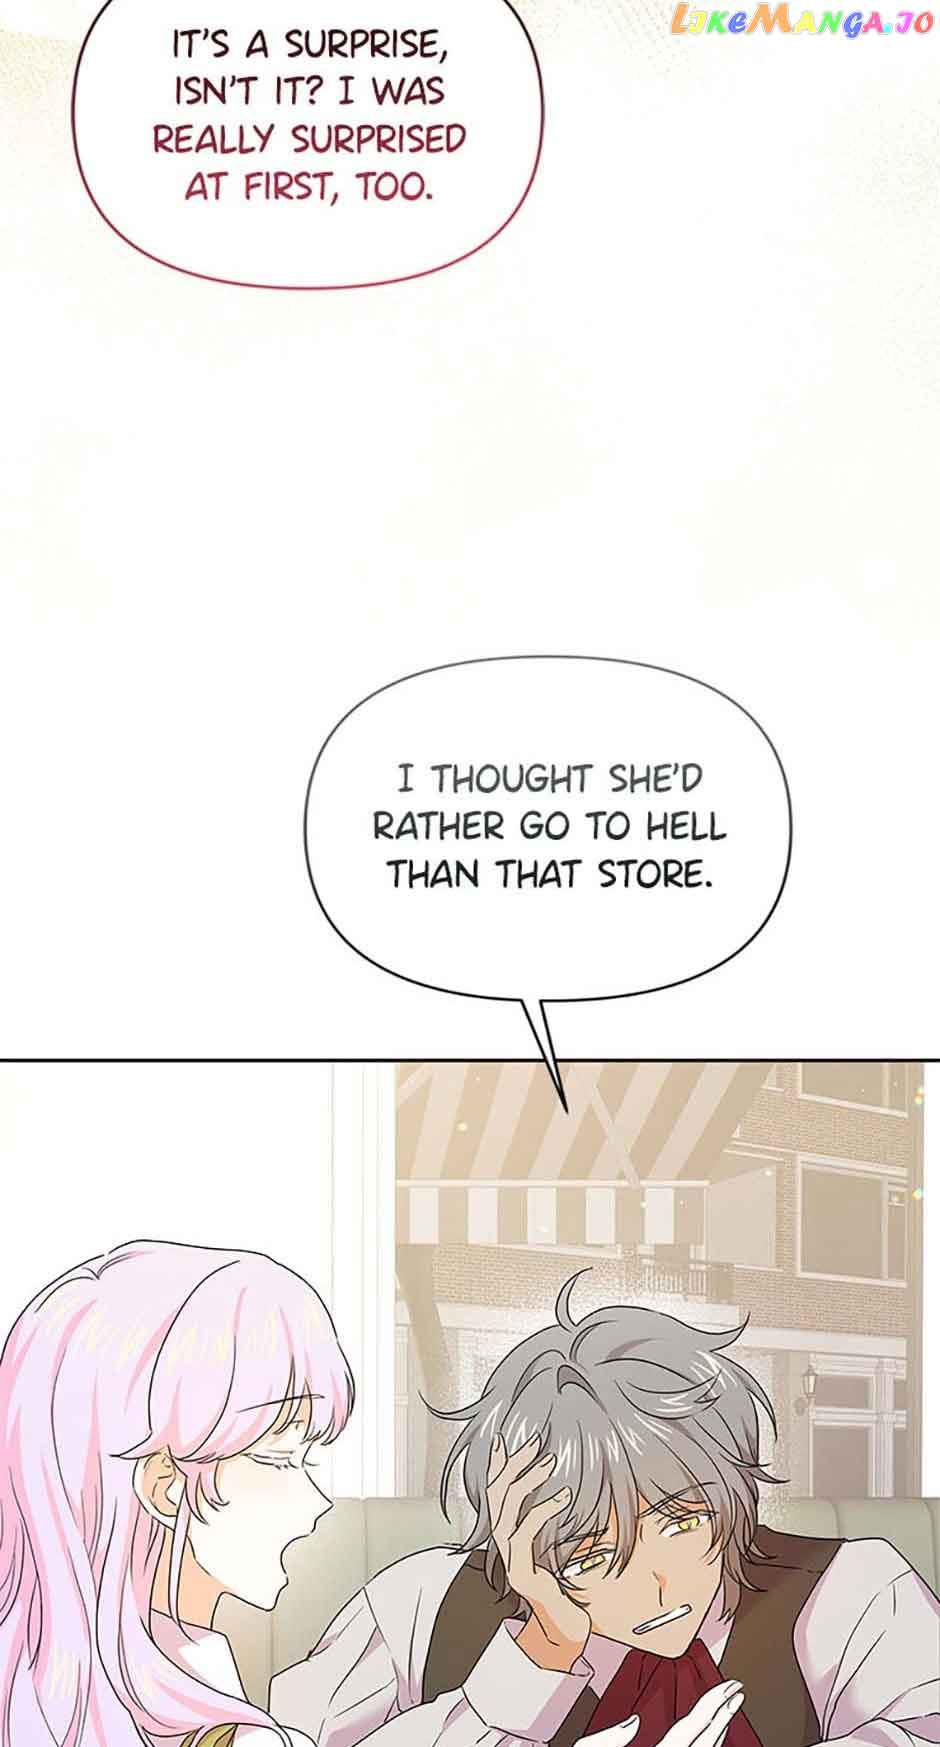 She came back and opened a dessert shop chapter 79